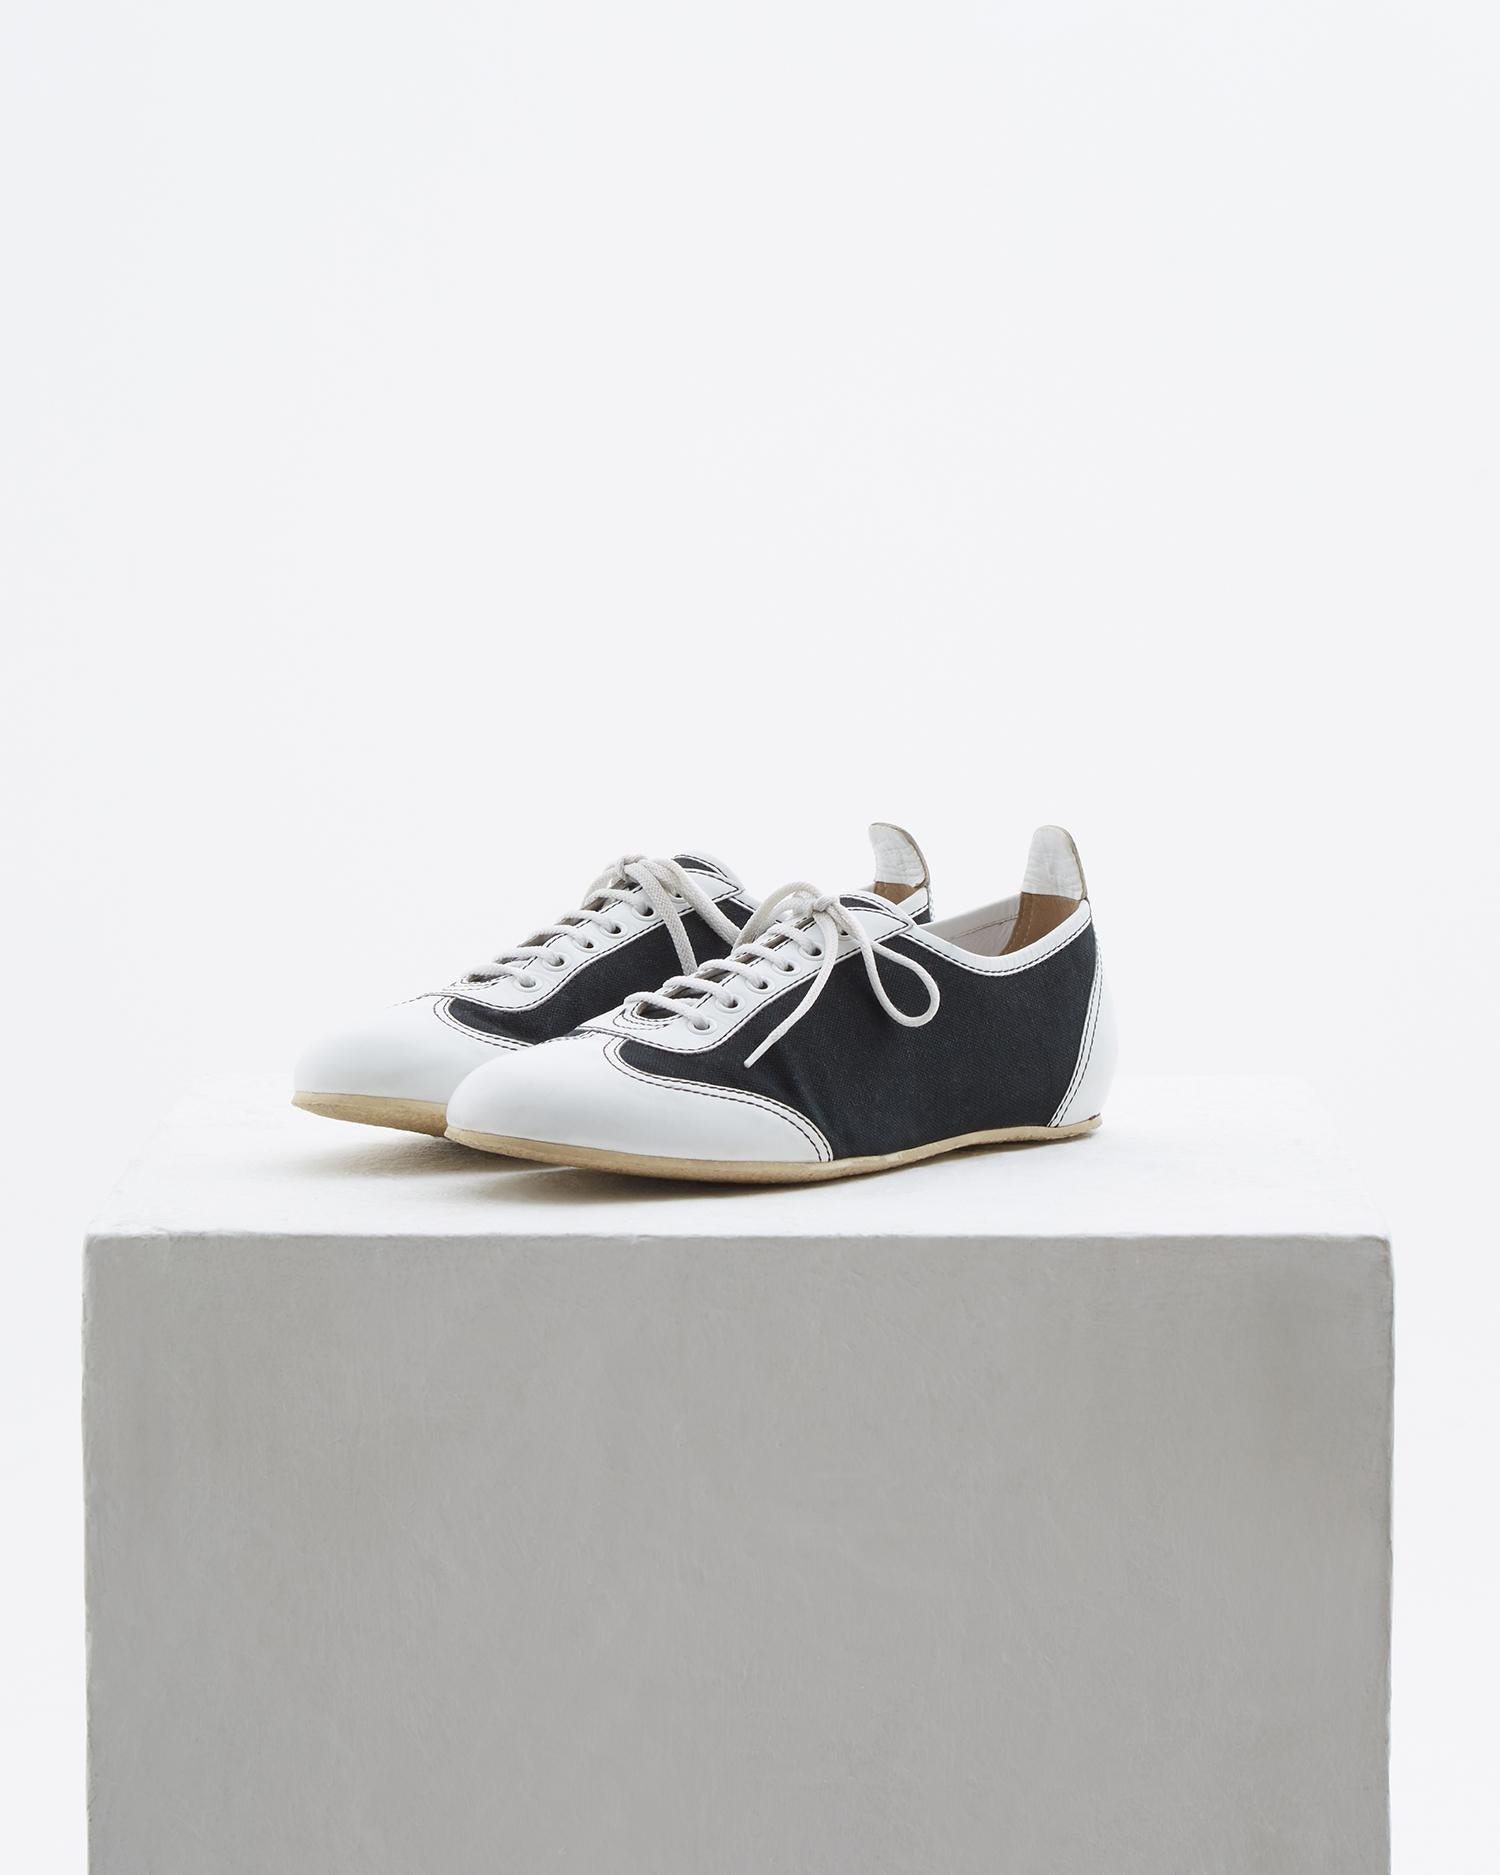 - Designed by Karl Lagerfeld 
- Sold by Skof.Archive
- Black canvas & white leather bowling shoes
- White laces 
- The signature 